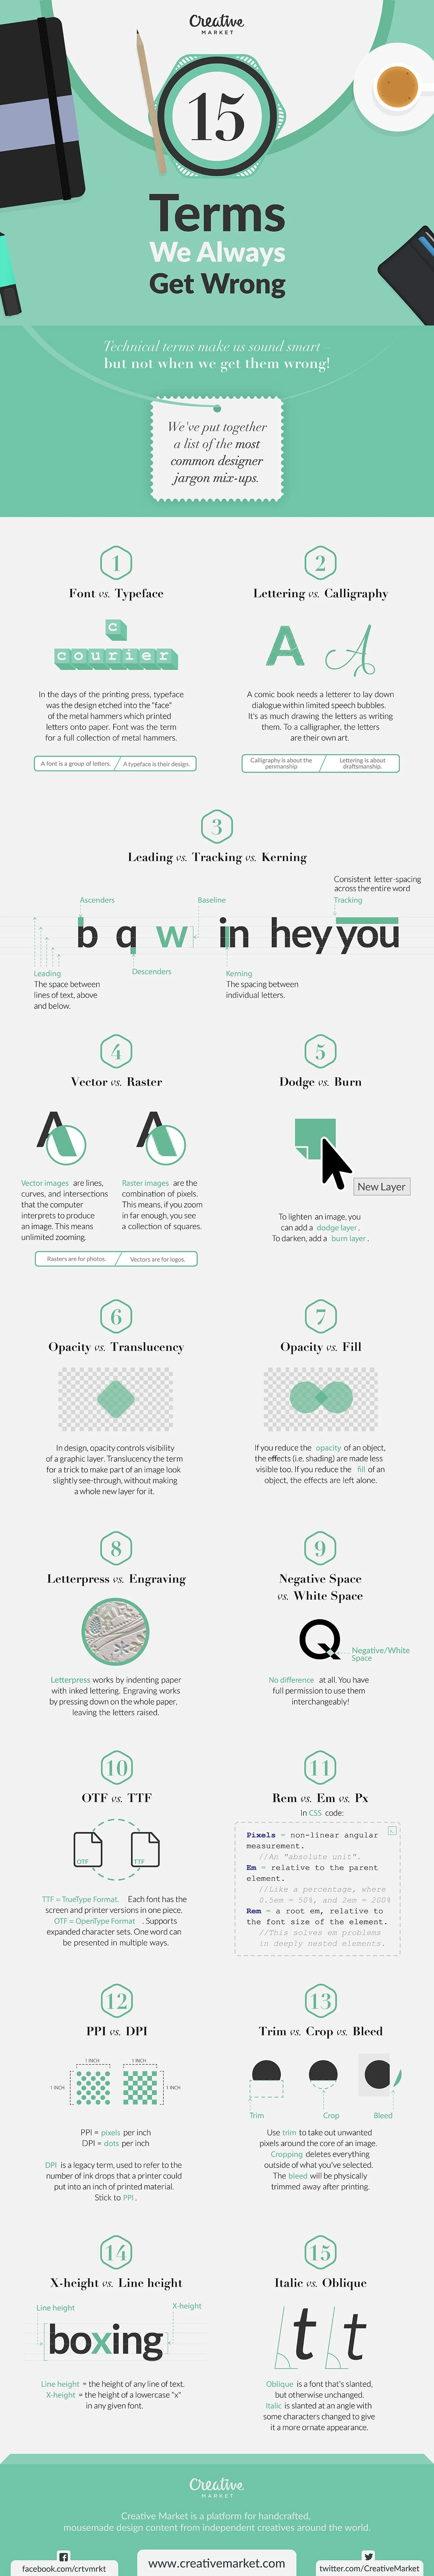 Design Terms We Always Get Wrong - #infographic